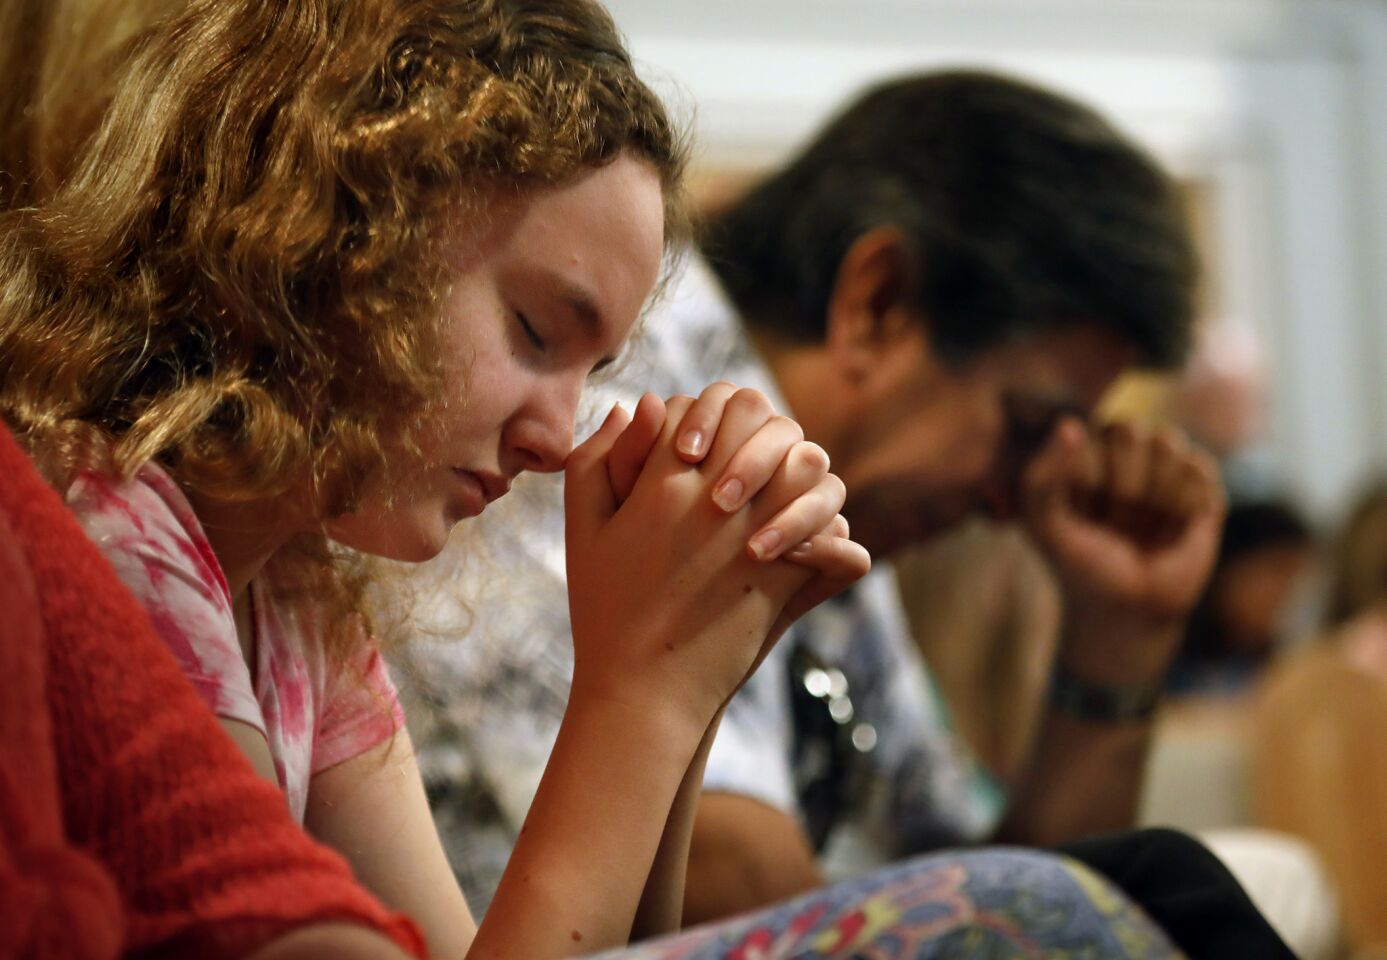 Lauren Fitzsimmons, 12, left, and Ed Staszeski pray during a service at First Church Coral Springs where prayers were said for the victims of the high school shooting.